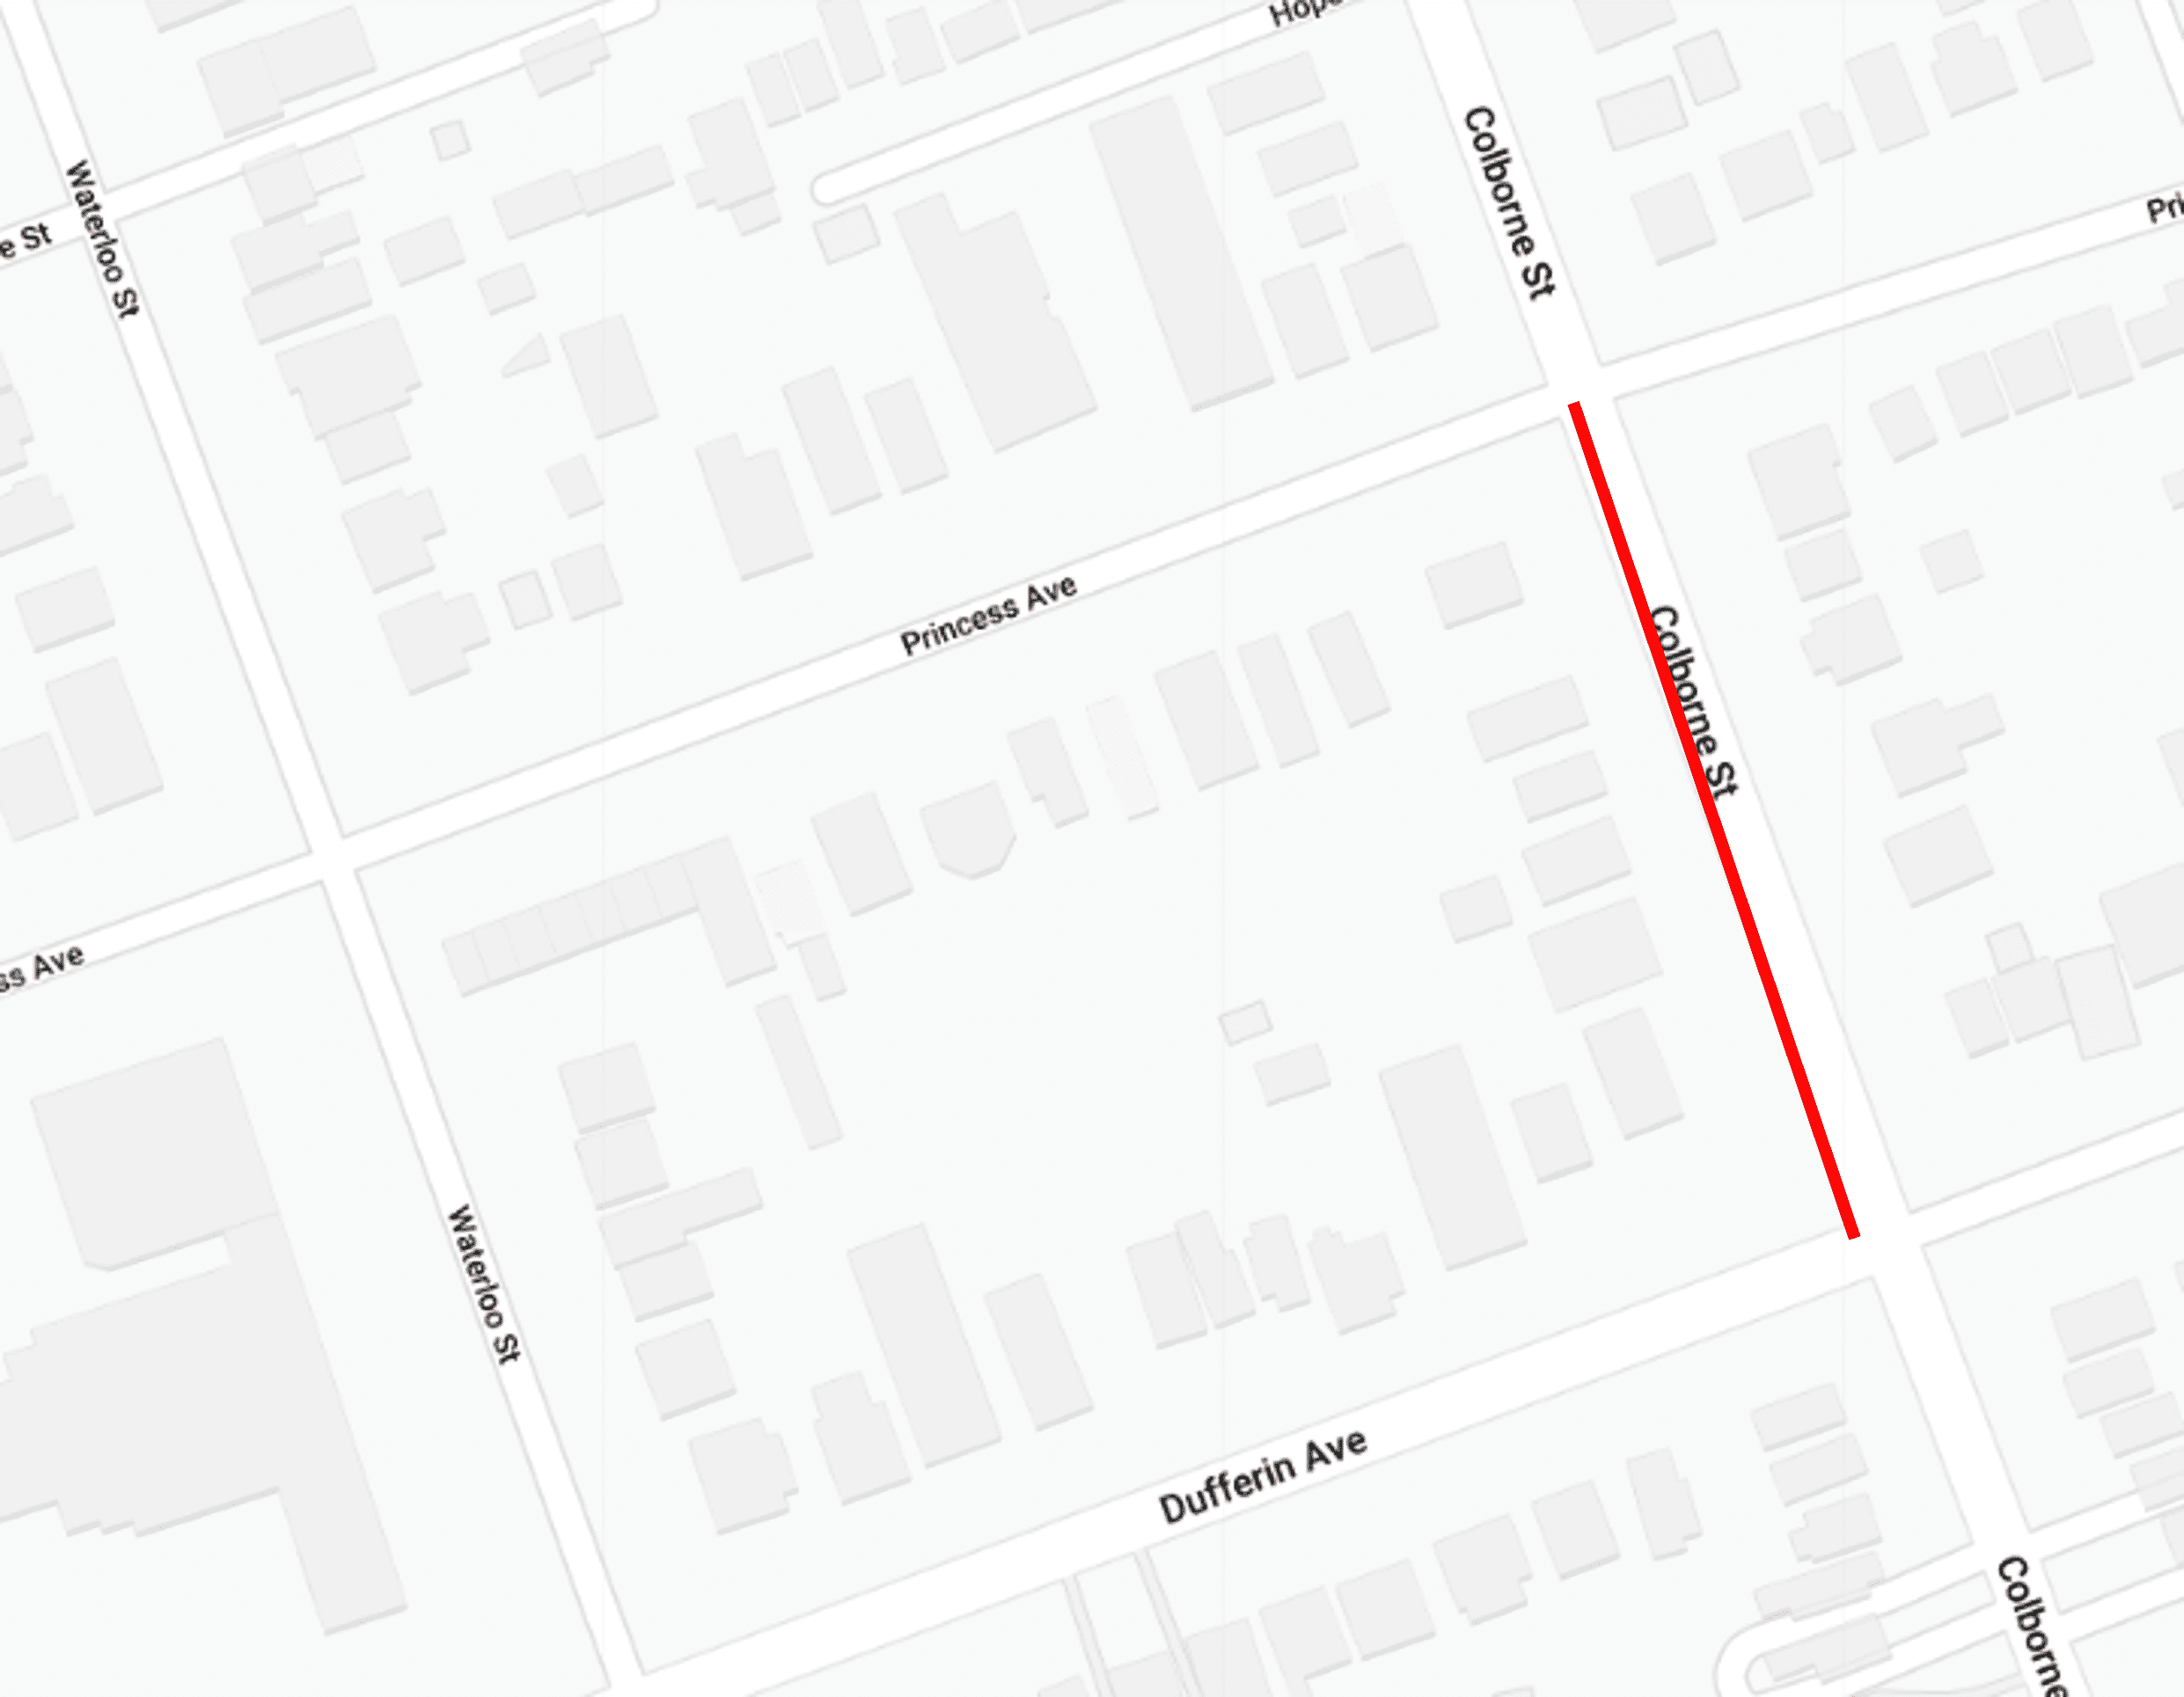 Above: A map of the upcoming road closure at Colborne Street between Princess Avenue and Dufferin Avenue.